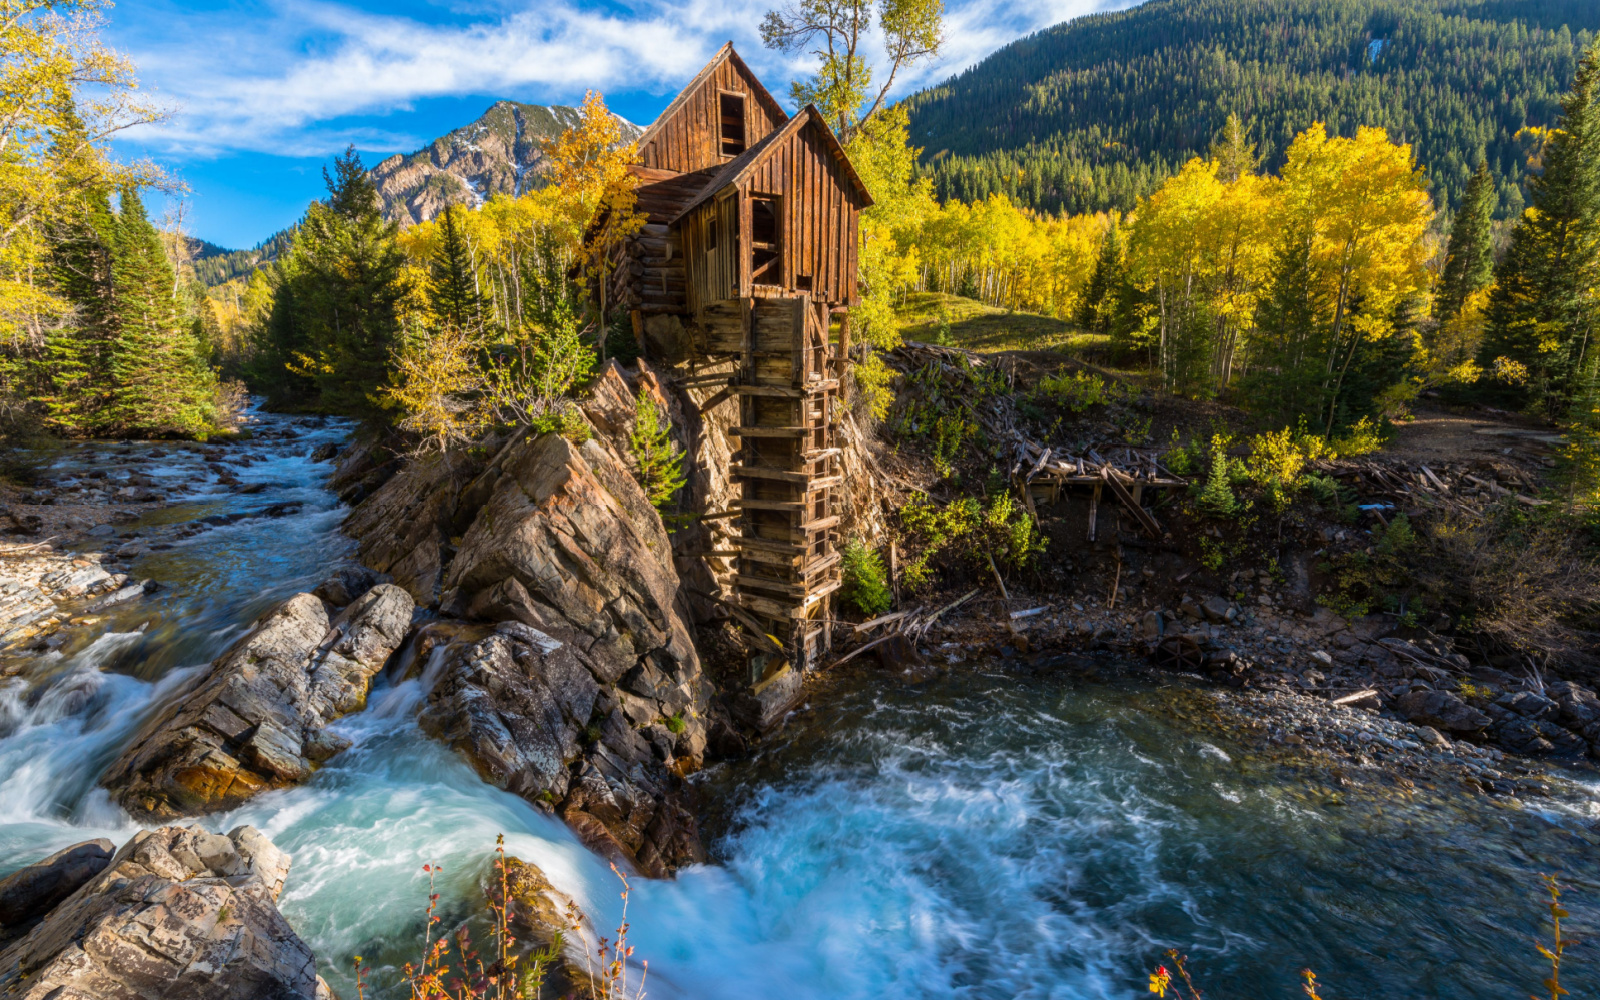 How to Visit the Famous Crystal Mill in 2023